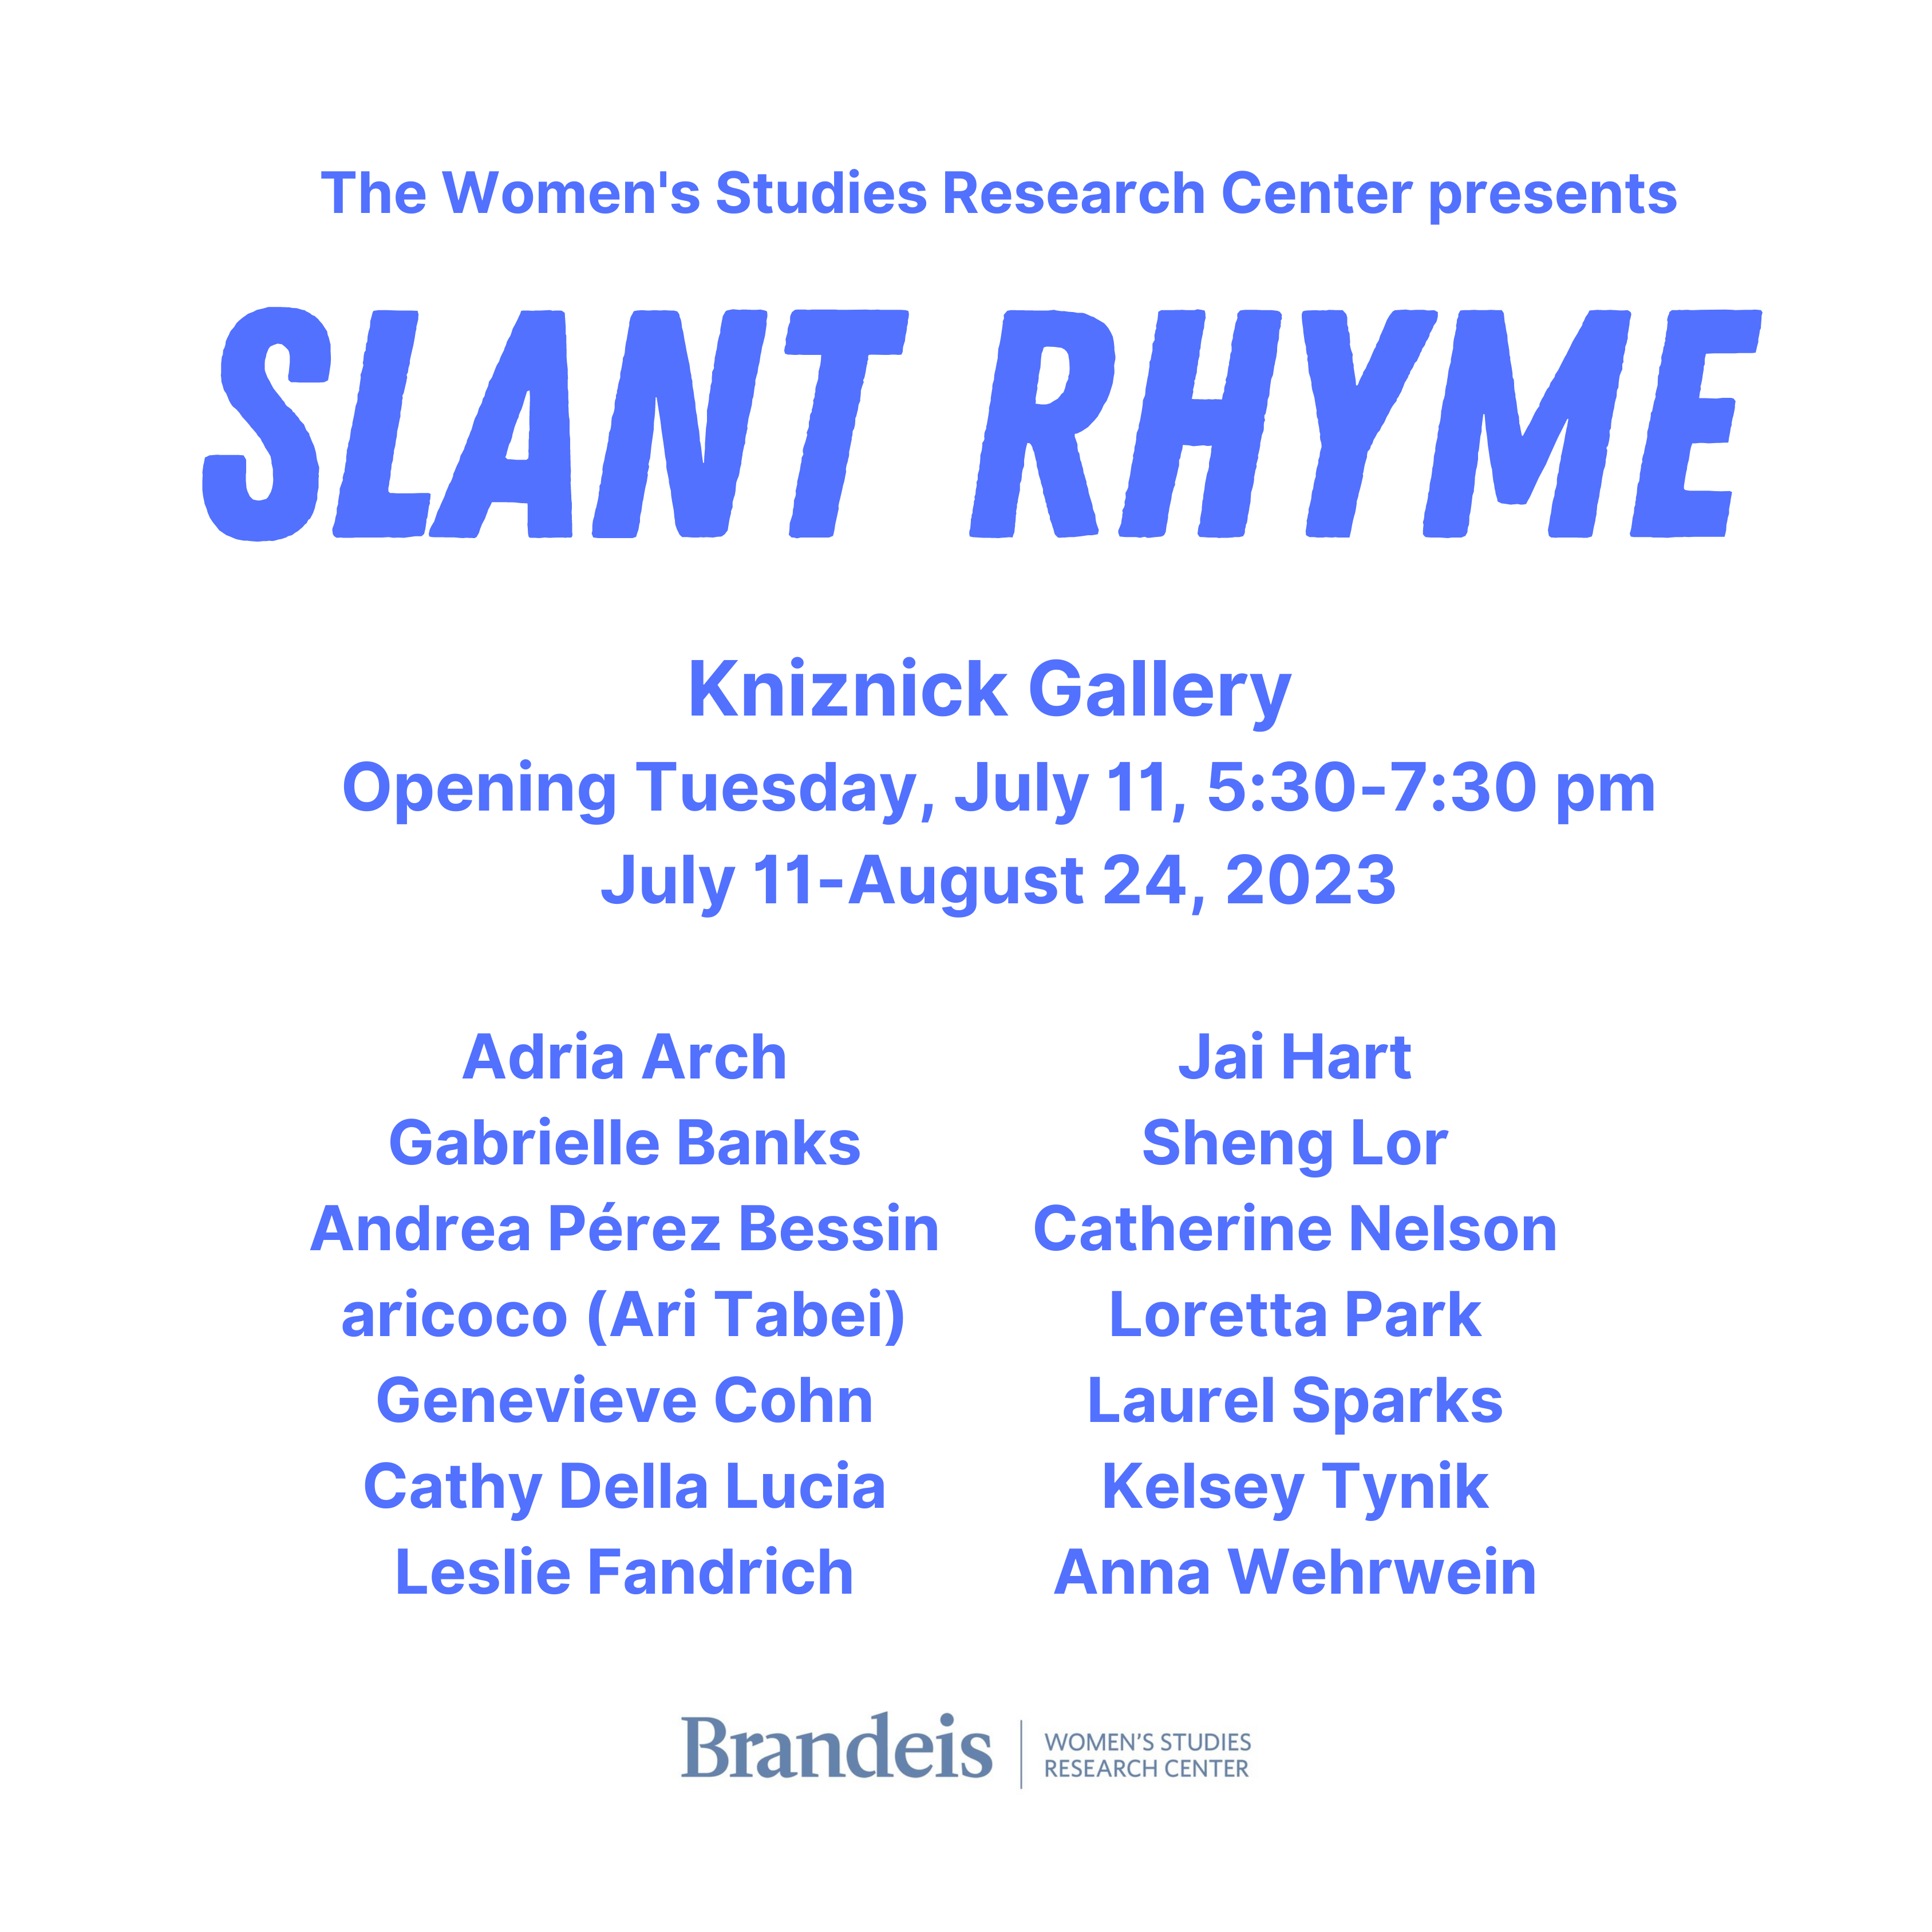 Exhibition announcement for Slant Rhyme, on view July 11-August 24, 2023 in the Kniznick Gallery. Presented by Brandeis' Women's Studies Research Center. Featuring 14 artists: Adria Arch, Gabrielle Banks, Andrea Pérez Bessin, aricoco (Ari Tabei), Genevieve Cohn, Cathy Della Lucia, Leslie Fandrich, Jai Hart, Sheng Lor, Catherine Nelson, Loretta Park, Laurel Sparks, Kelsey Tynik, Anna Wehrwein